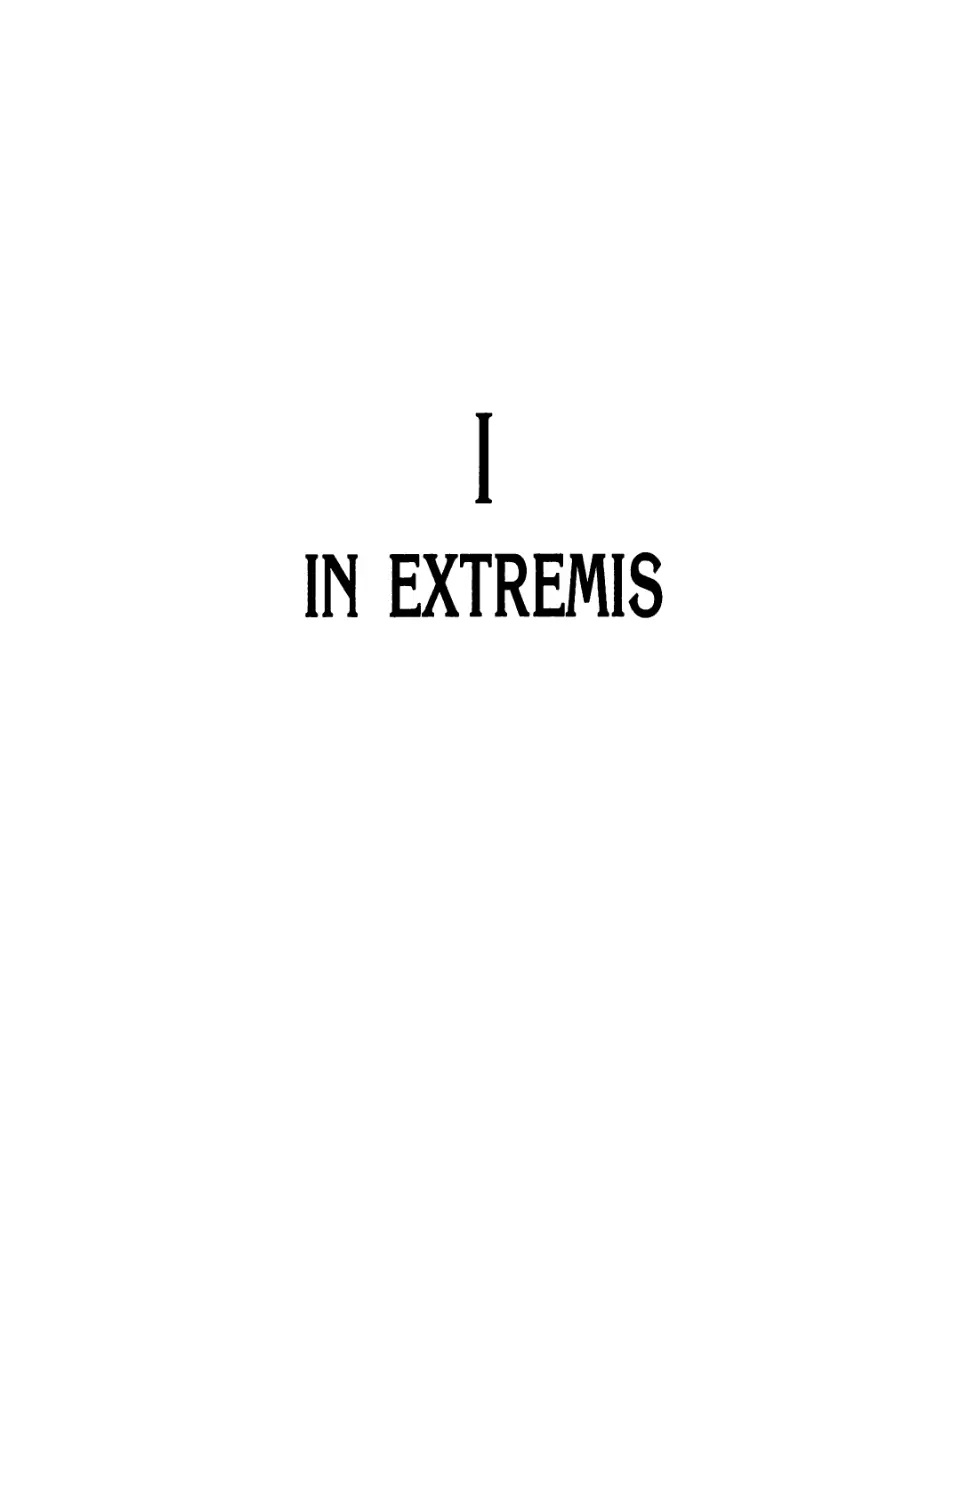 I. IN EXTREMIS